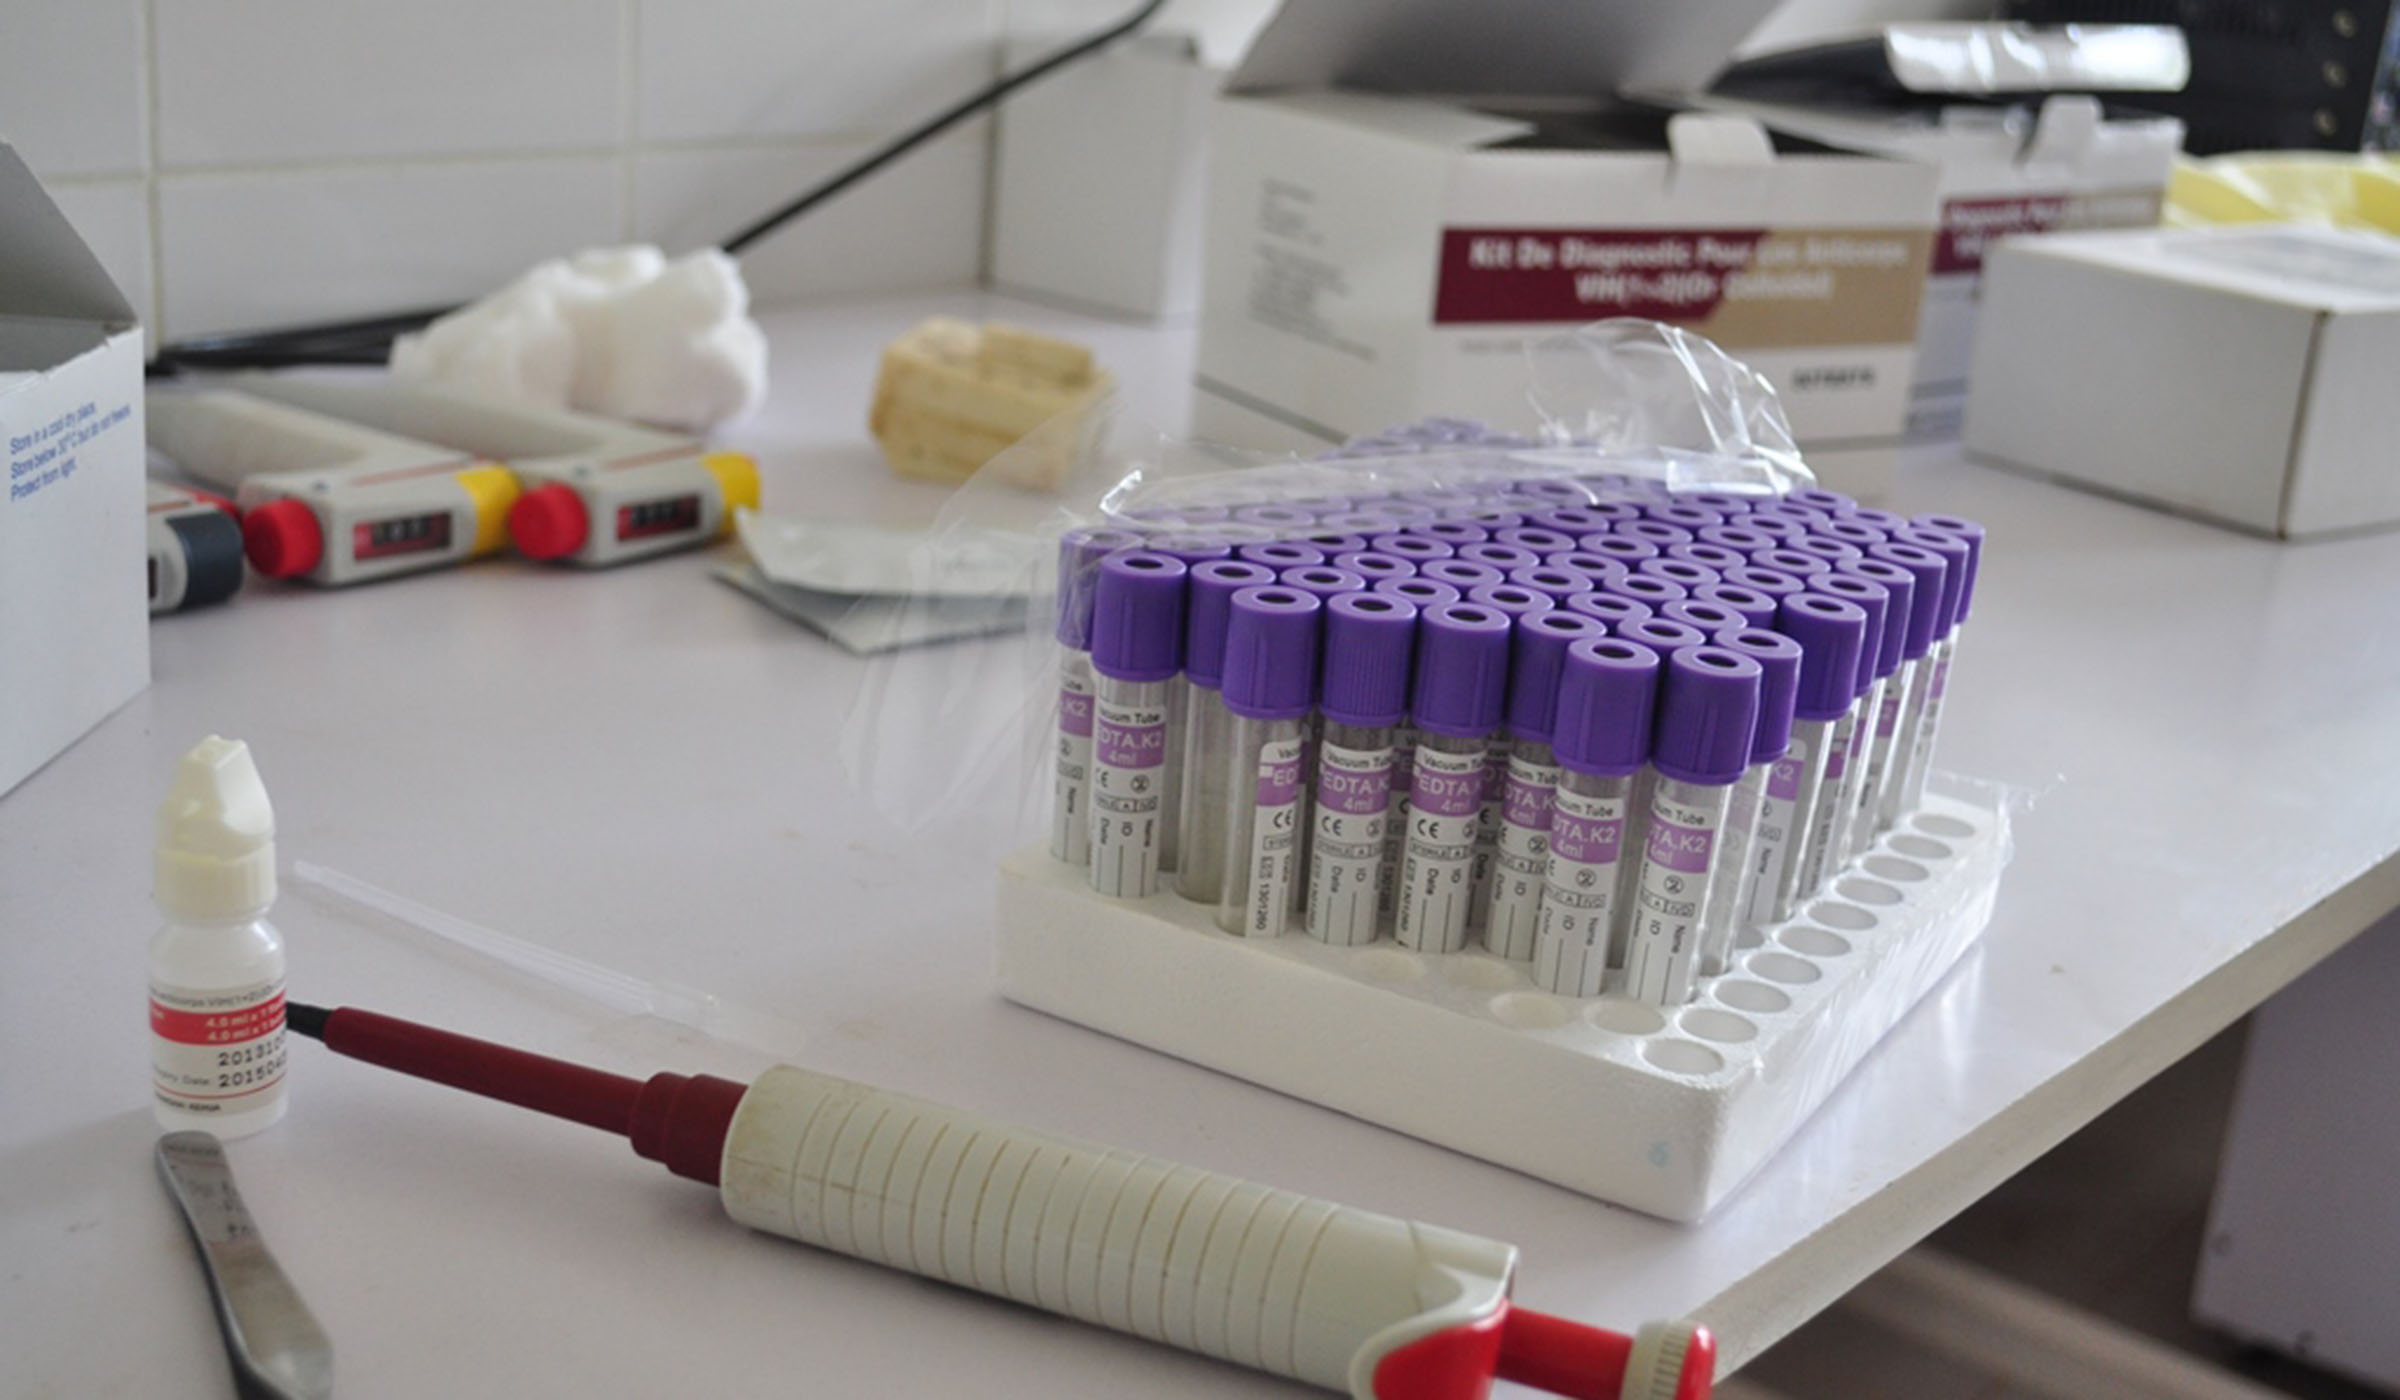 Equipment for blood analysis at a clinic. Net photo.